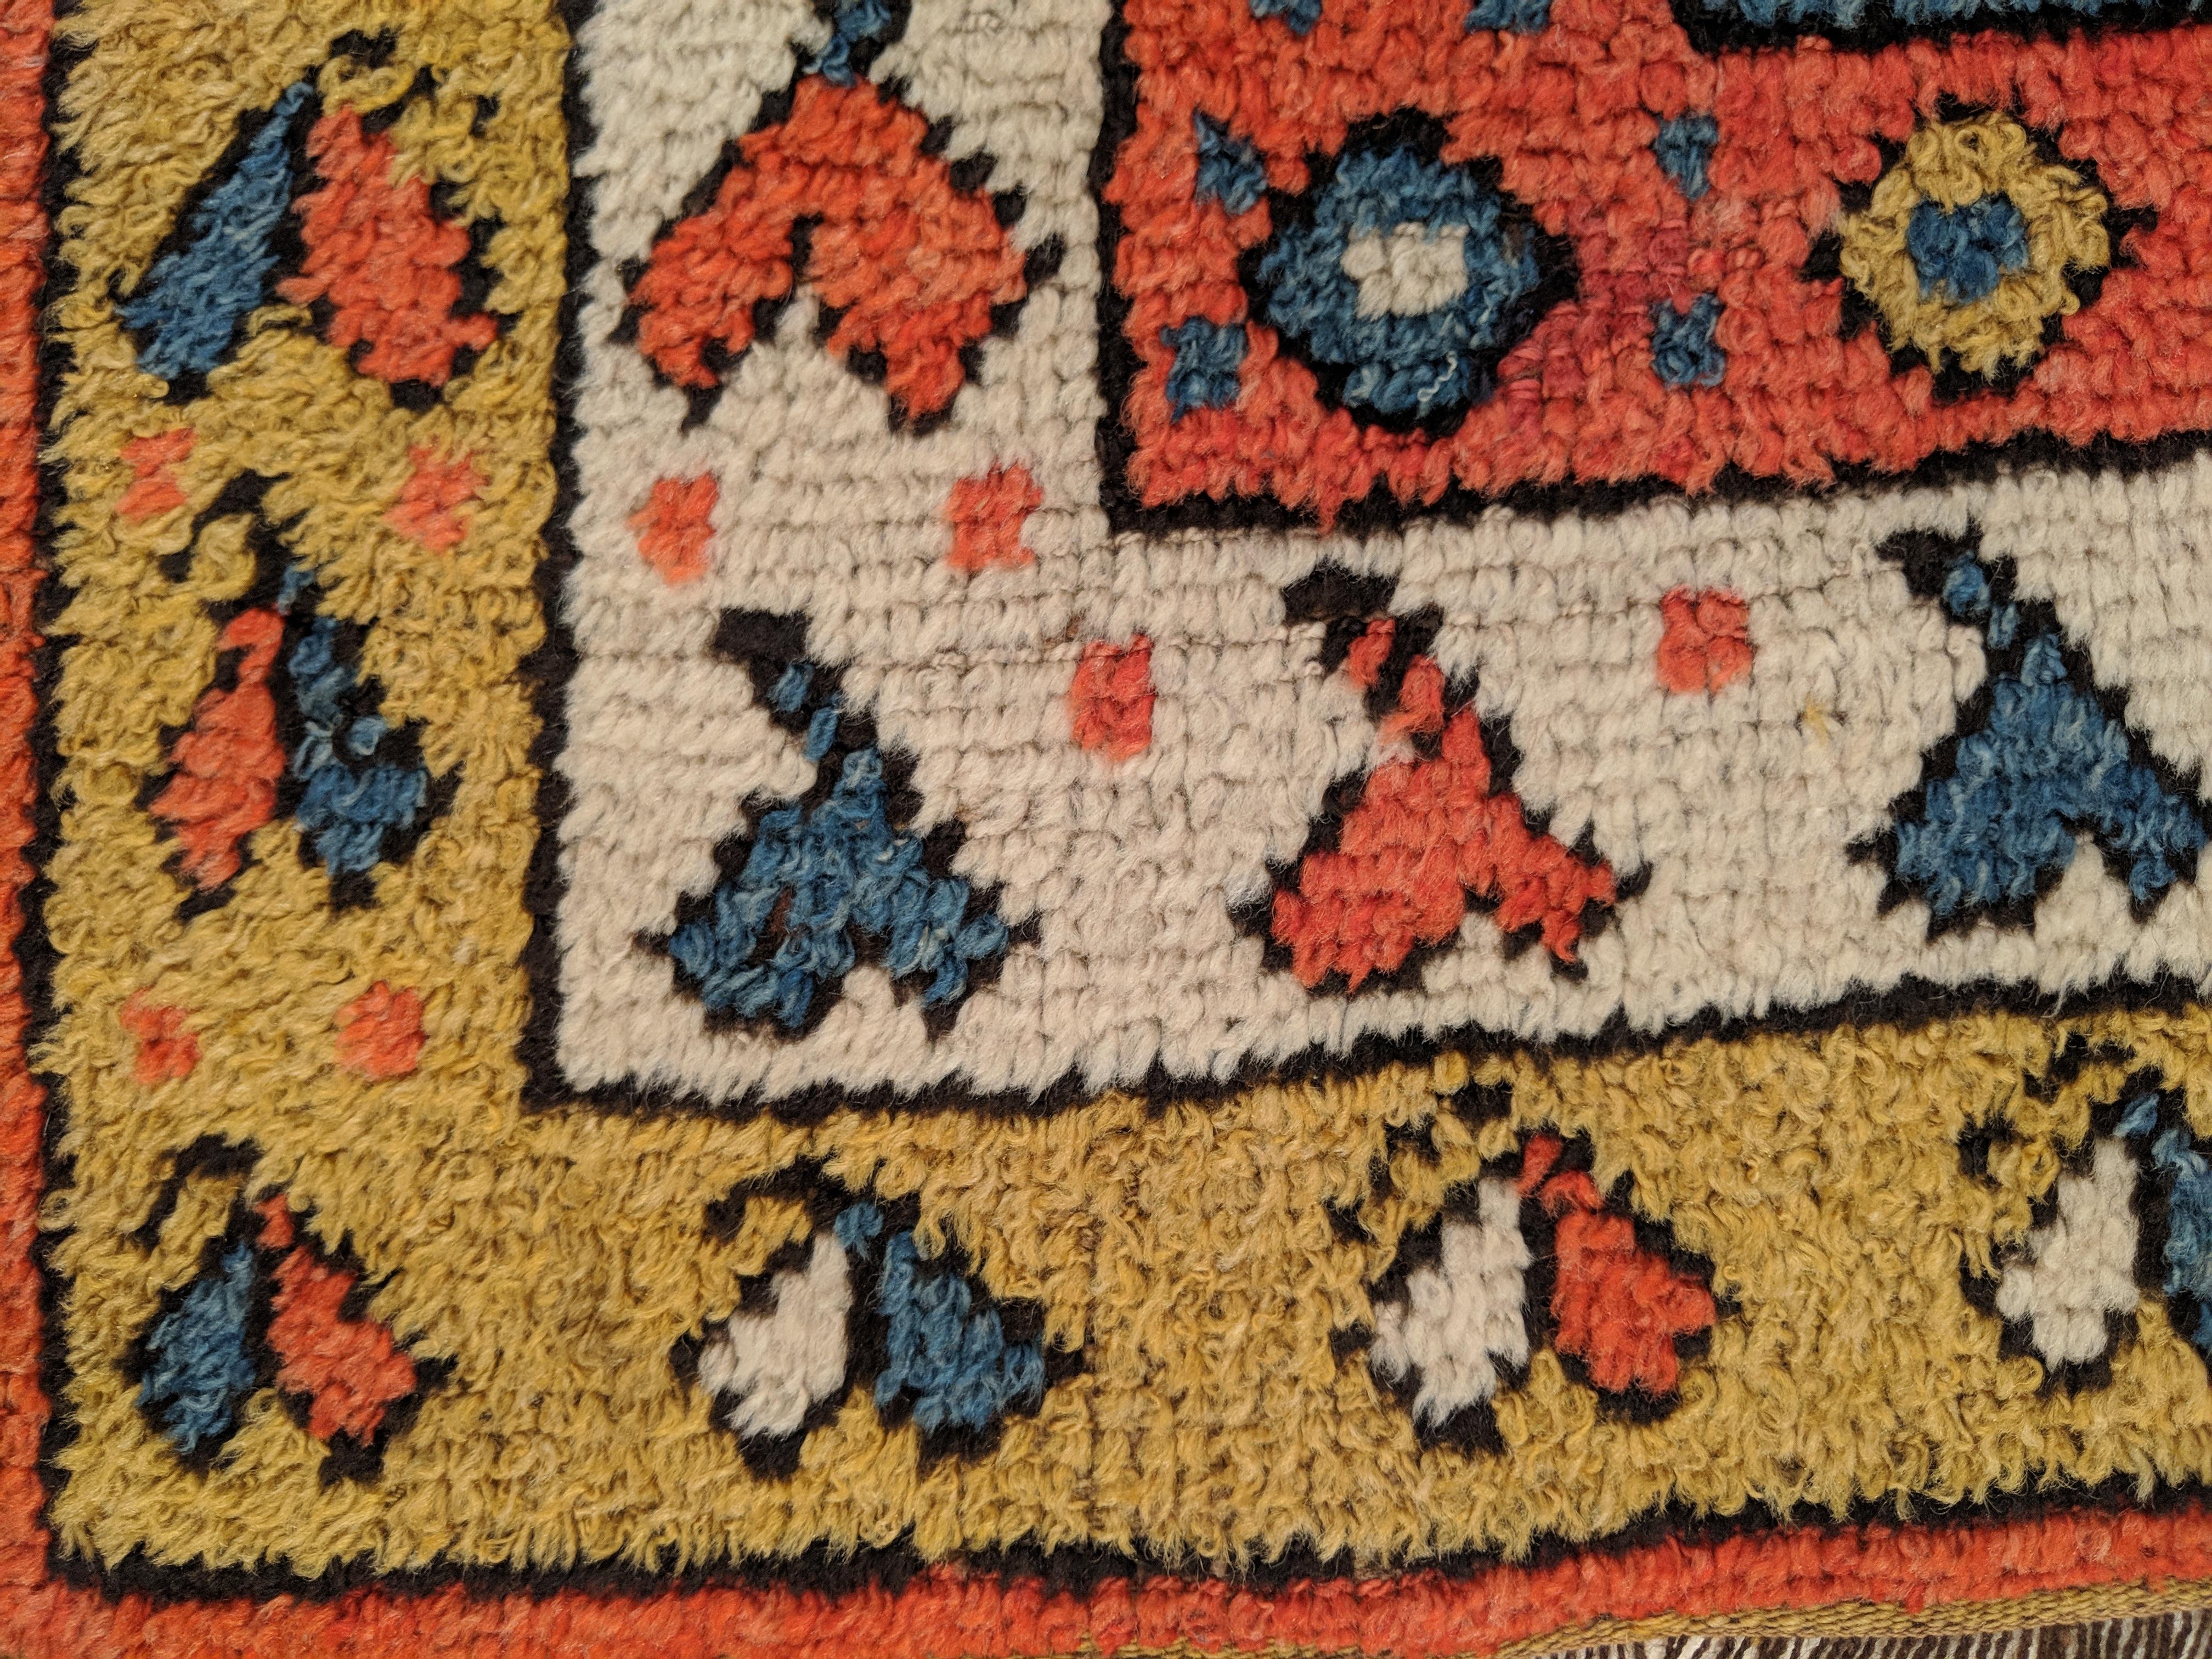 What immediately attracted me to this rug are the borders decorated by what look to me like hearts. There seem to be a cluster of weavings from western Anatolia which are distinguished by borders containing this romantic motif, although I have never